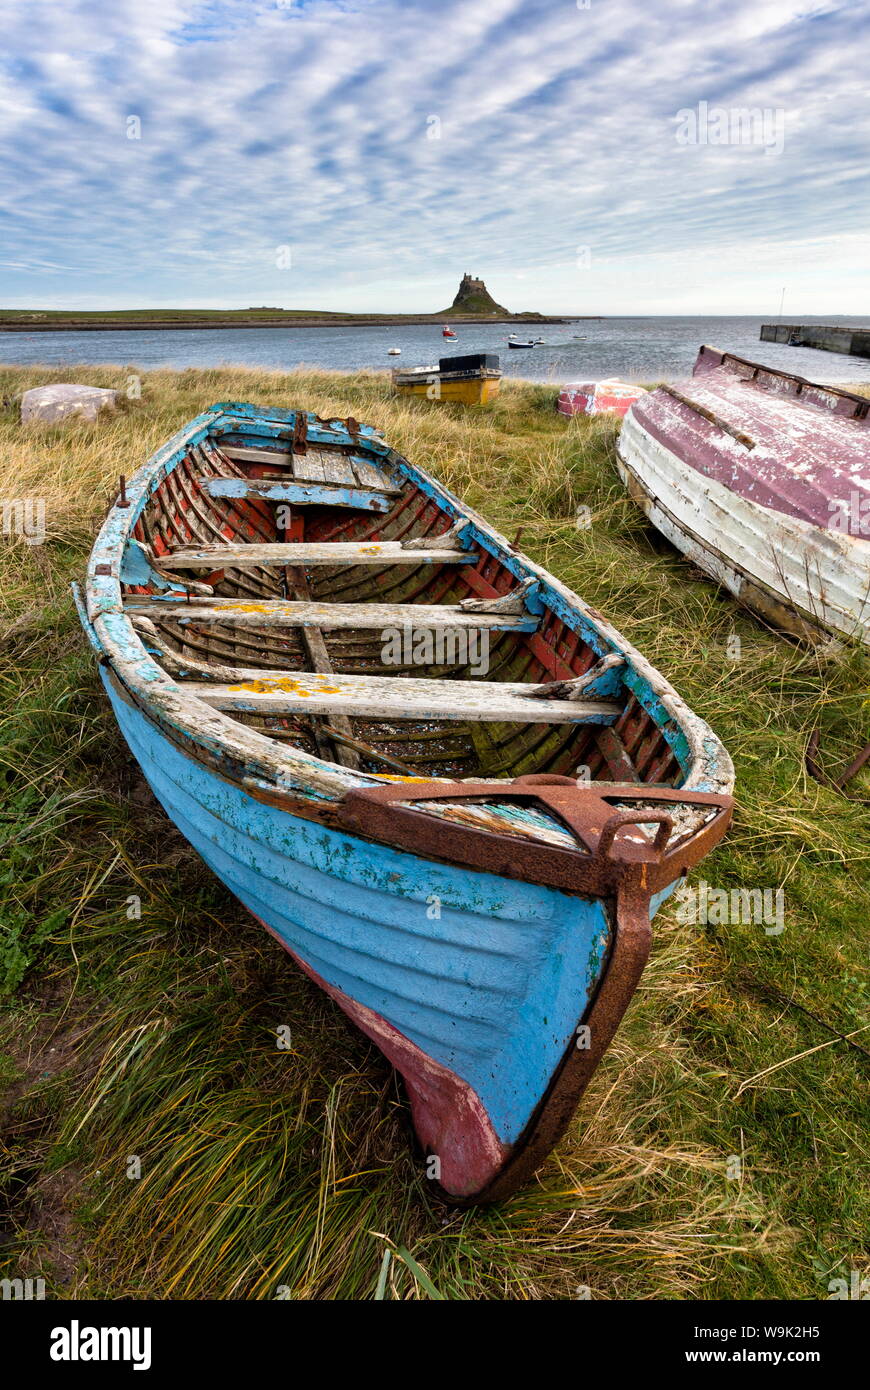 View towards Lindisfarne Castle with an old blue and red fishing boat in the foreground, Lindisfarne (Holy Island), Northumberland, England, UK Stock Photo